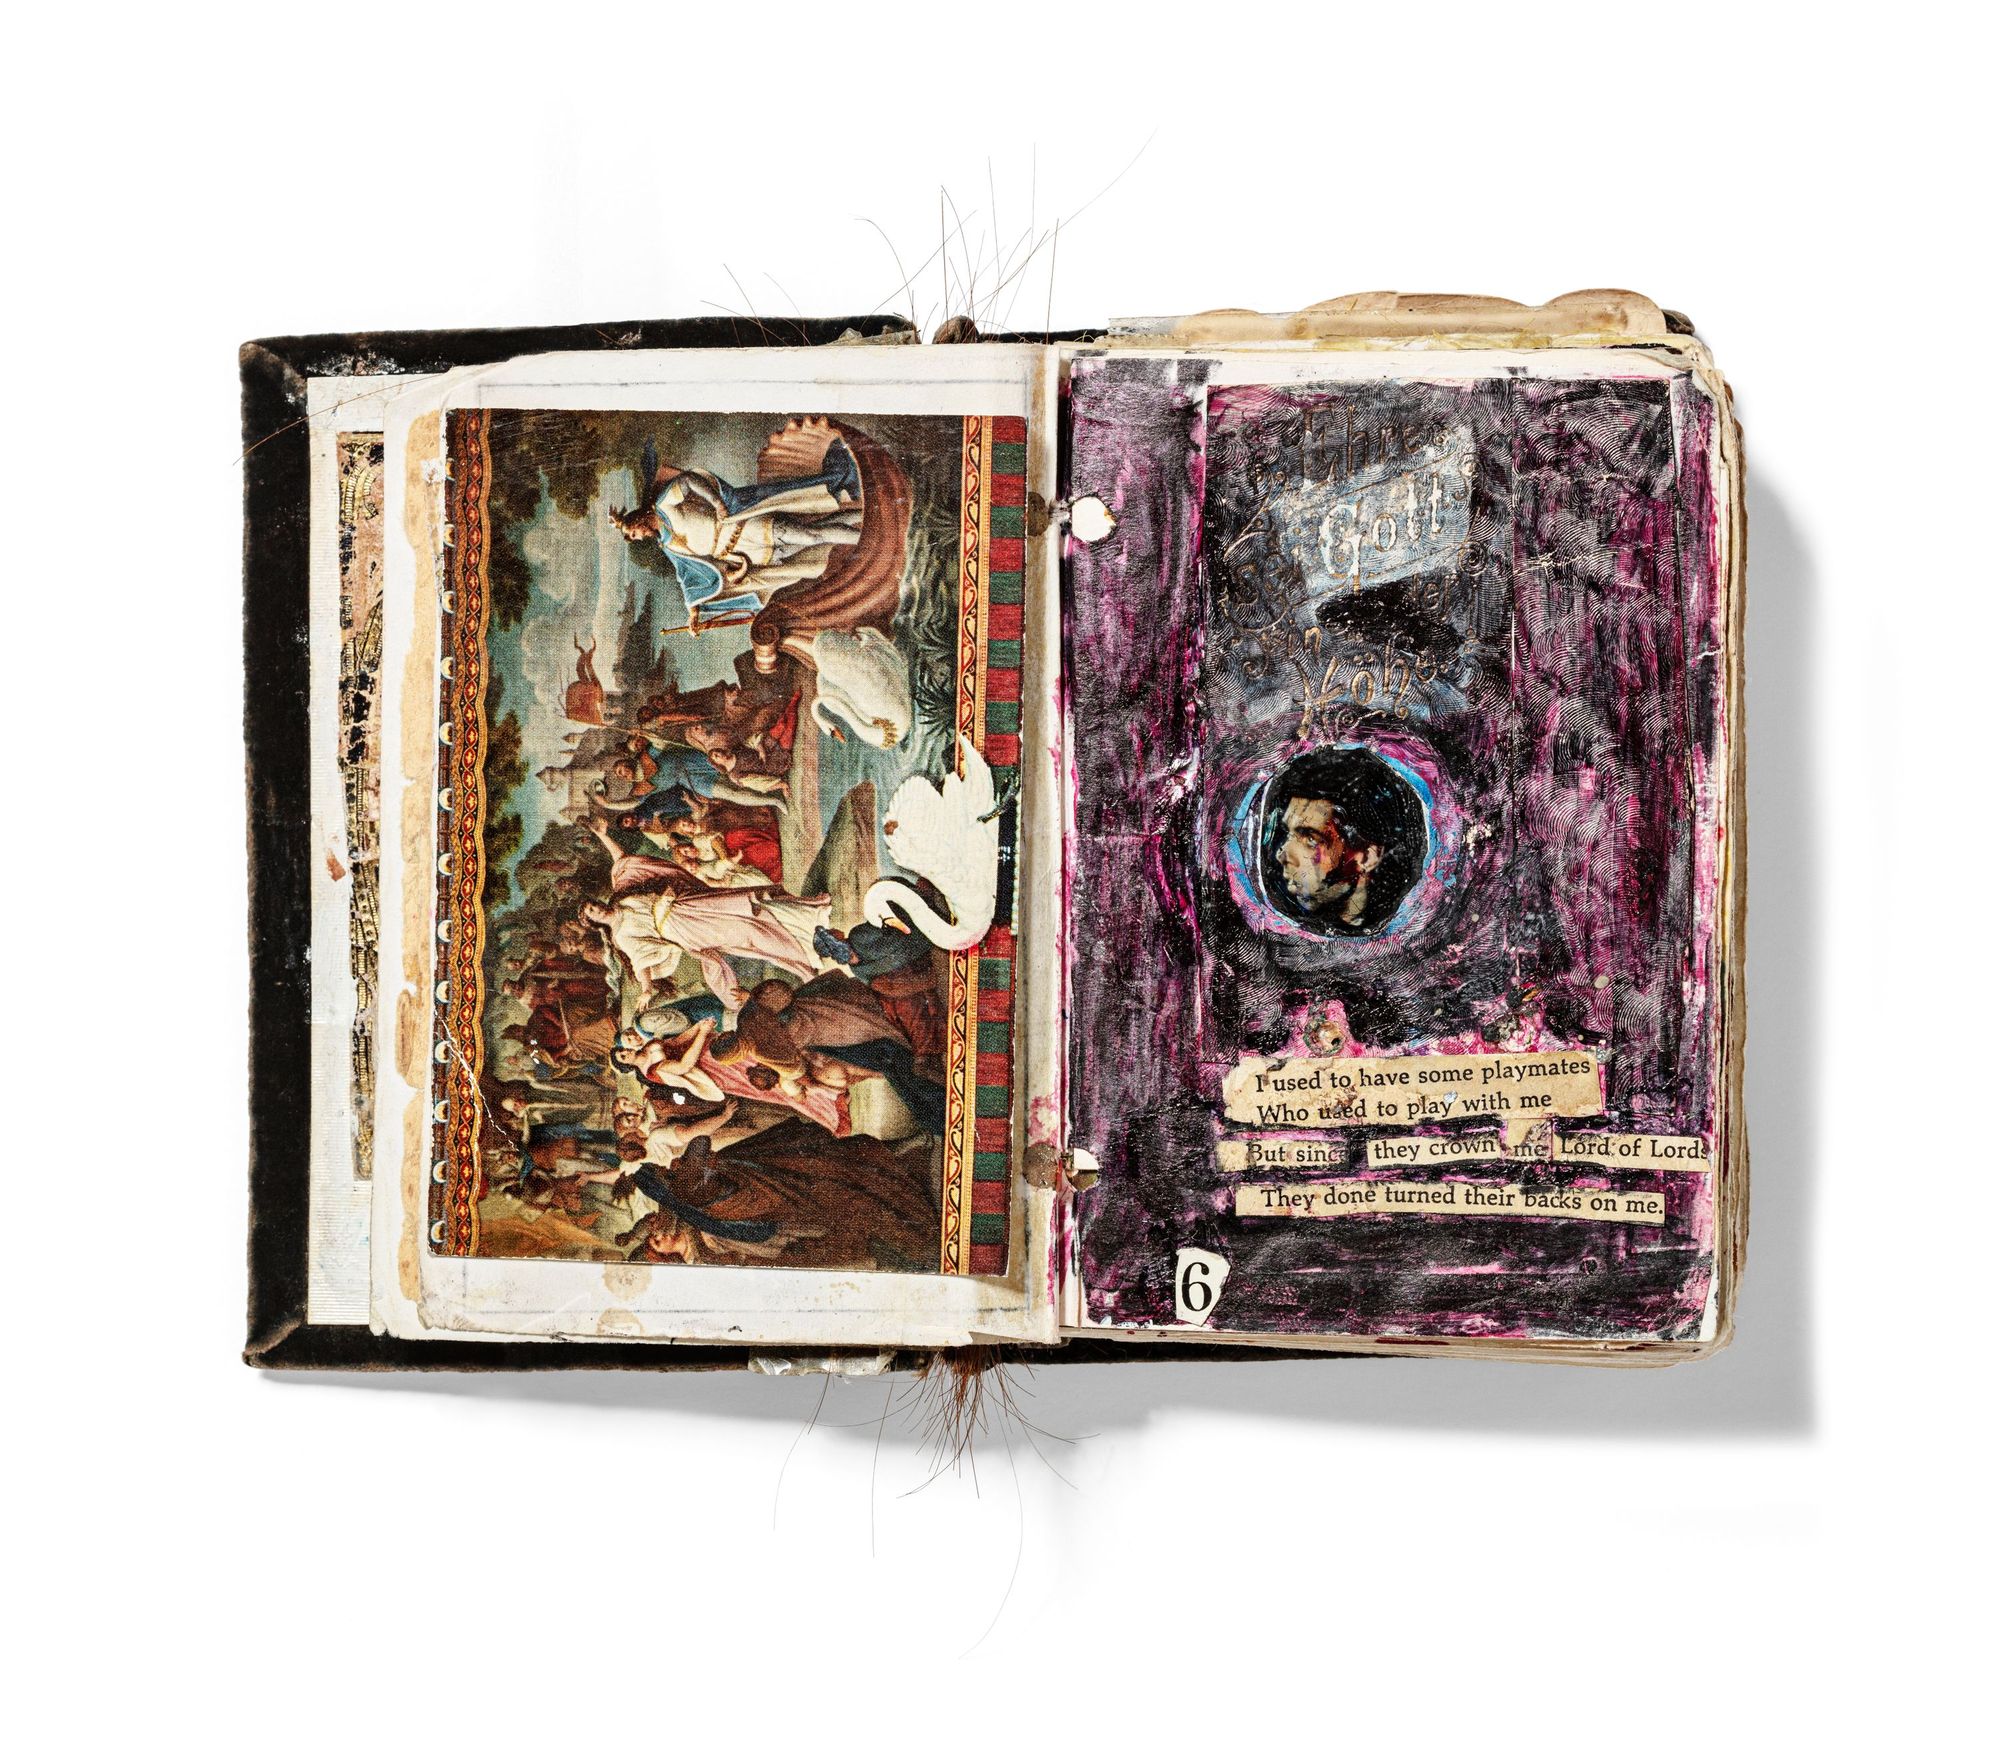 Handmade book by Nick Cave